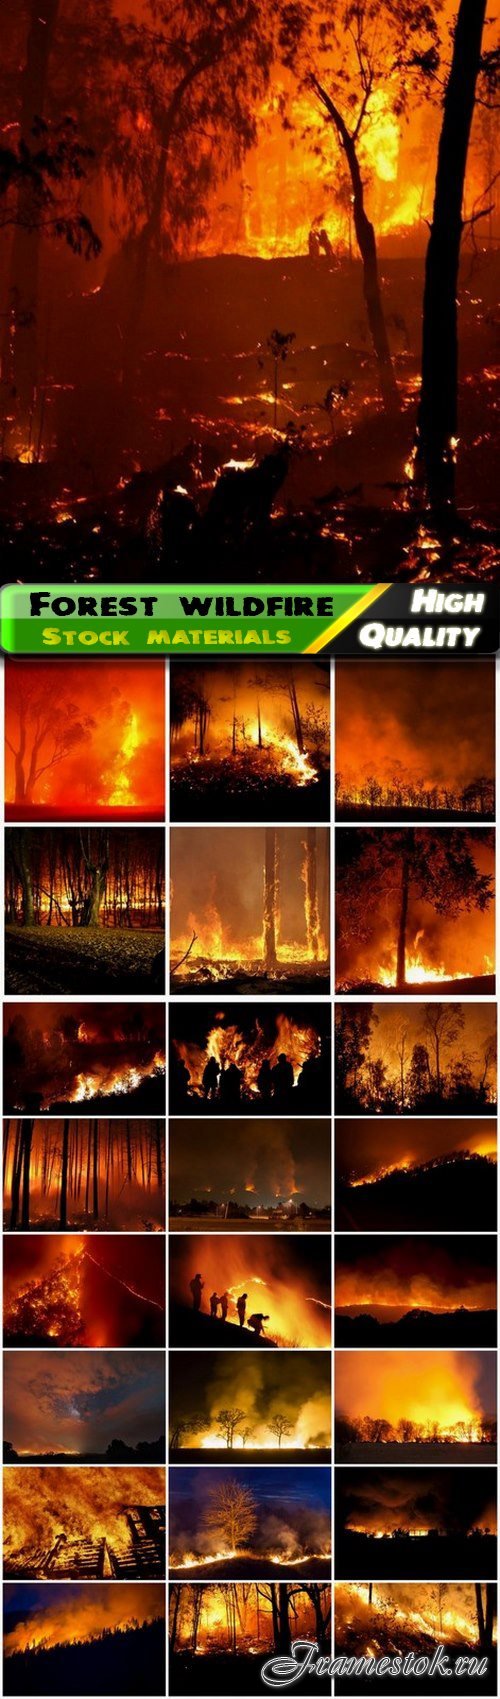 Nature landscape of forest wildfire and fire flames - 25 HQ Jpg